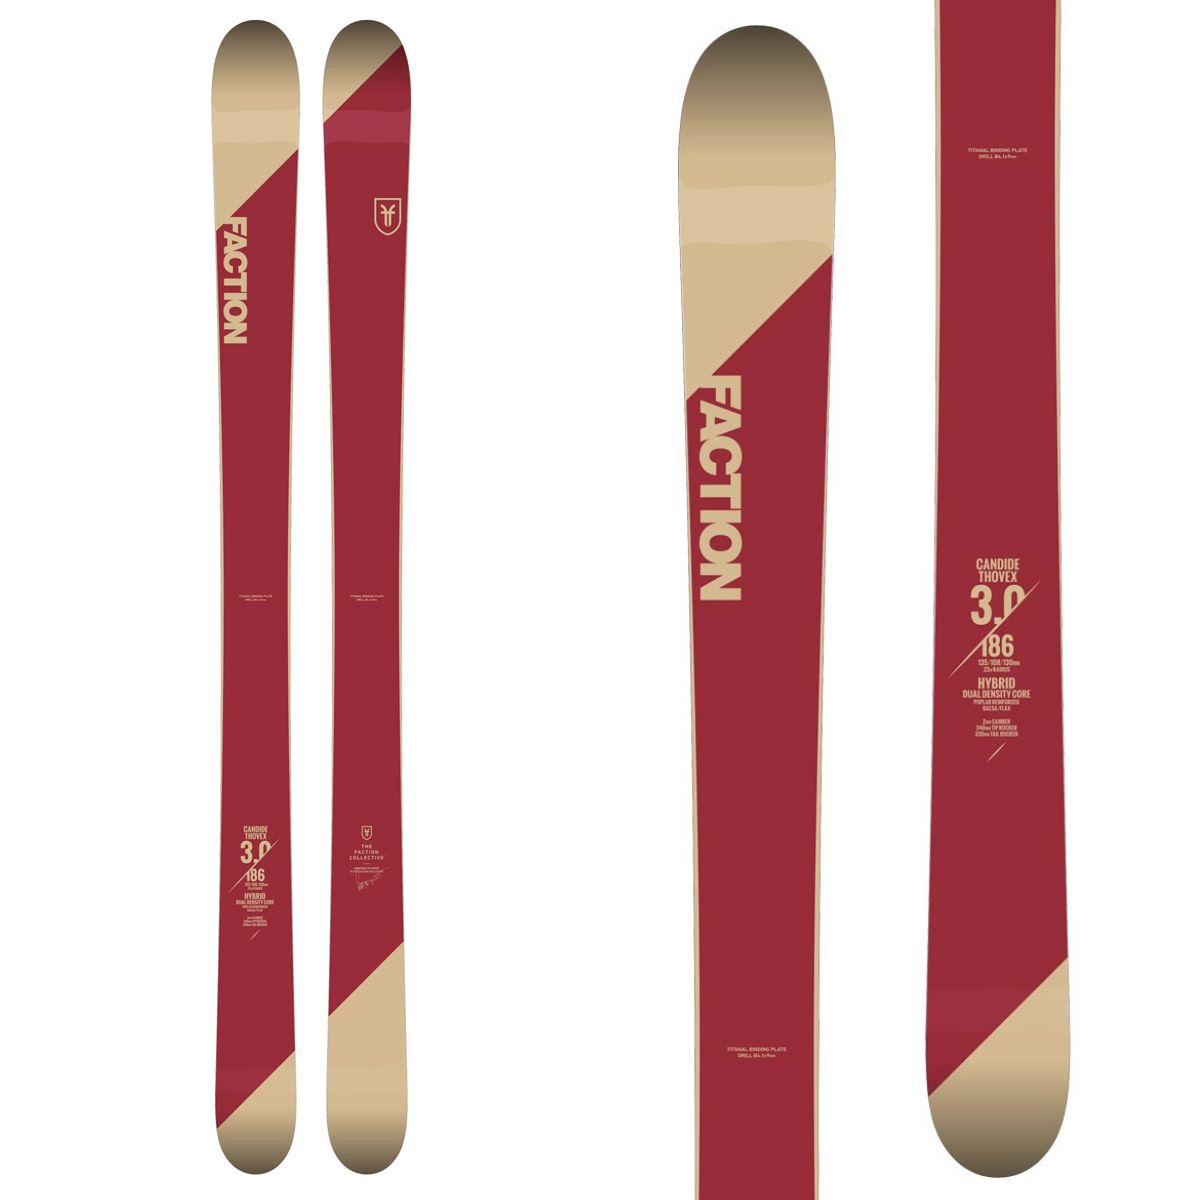 Skis Faction Candide 3.0 2019